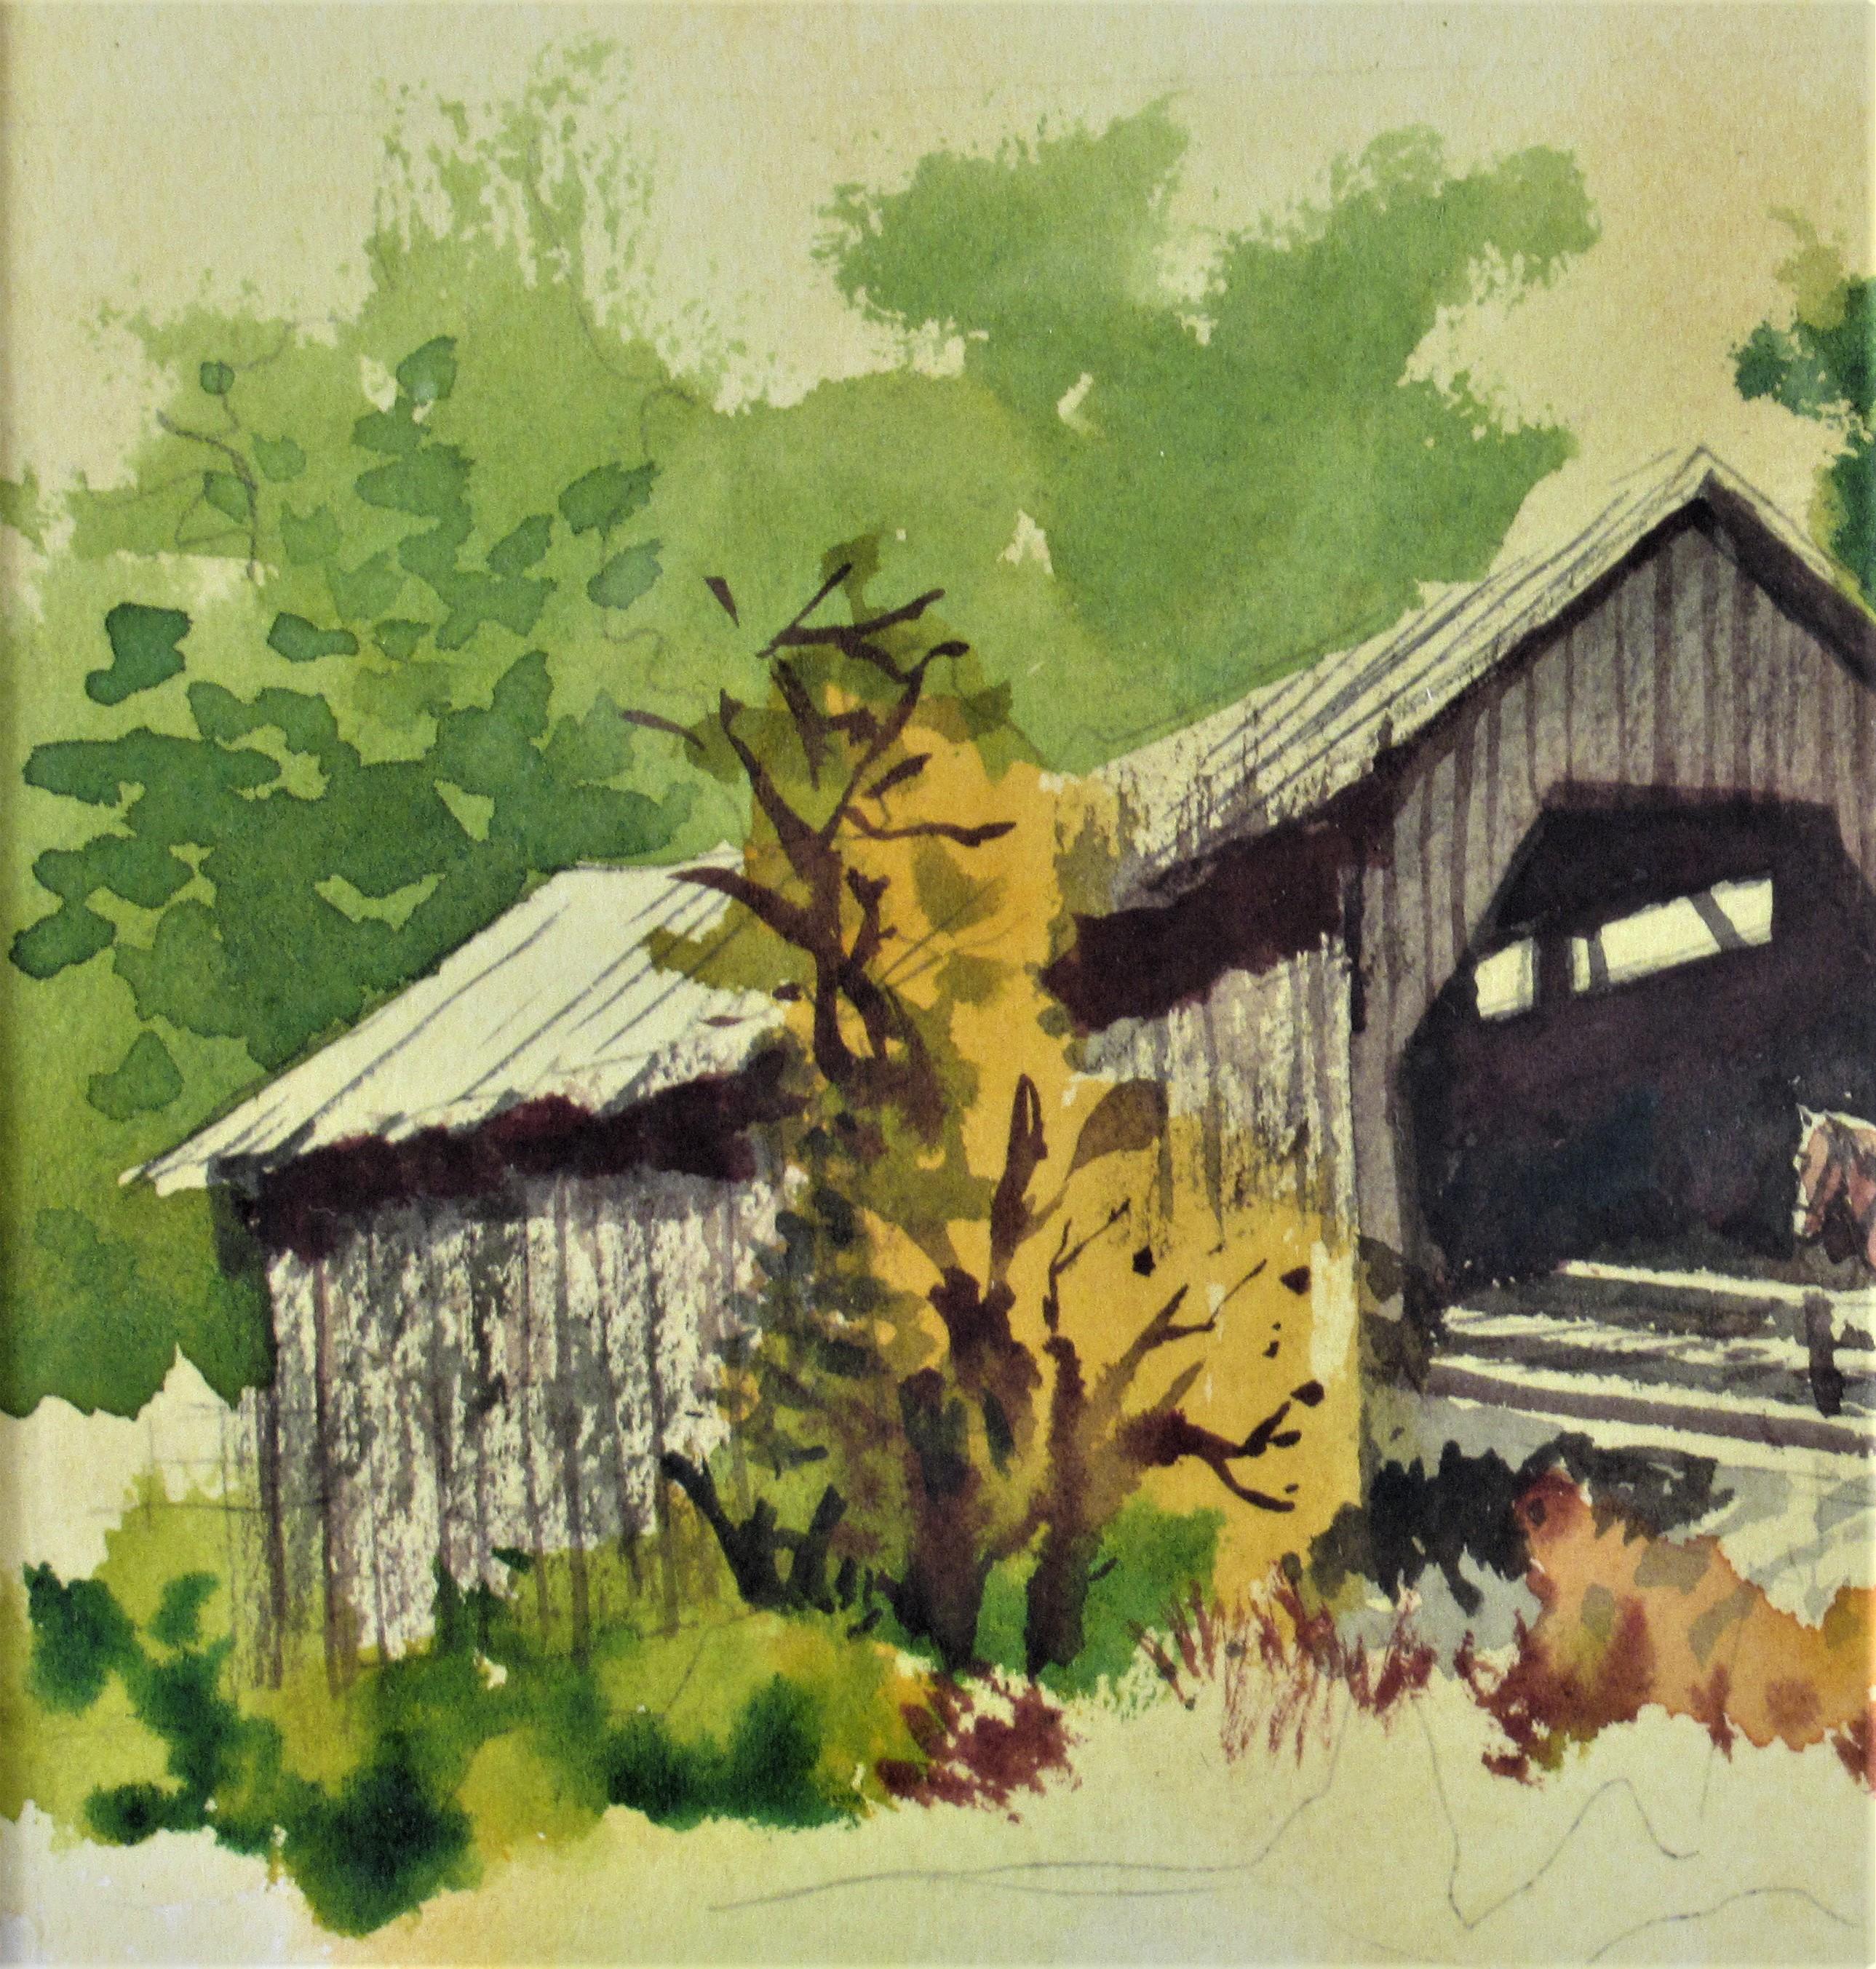 Barn and Carriage - Impressionist Art by Jake Lee